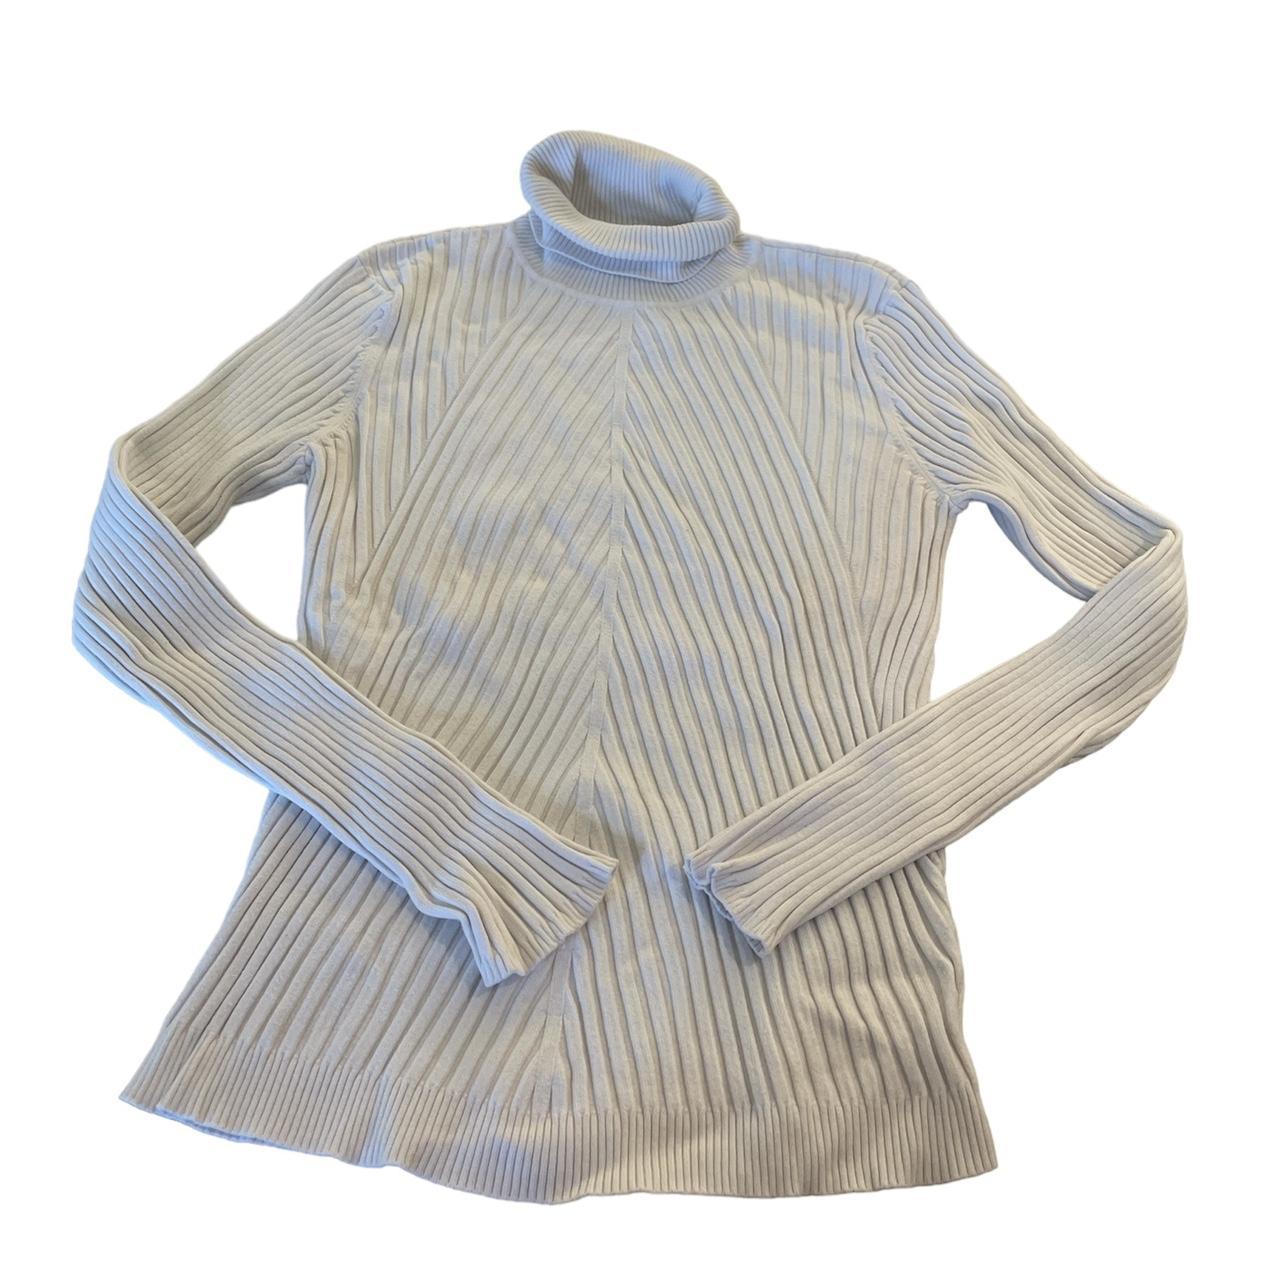 Ribbed Turtleneck Sweater - Off White